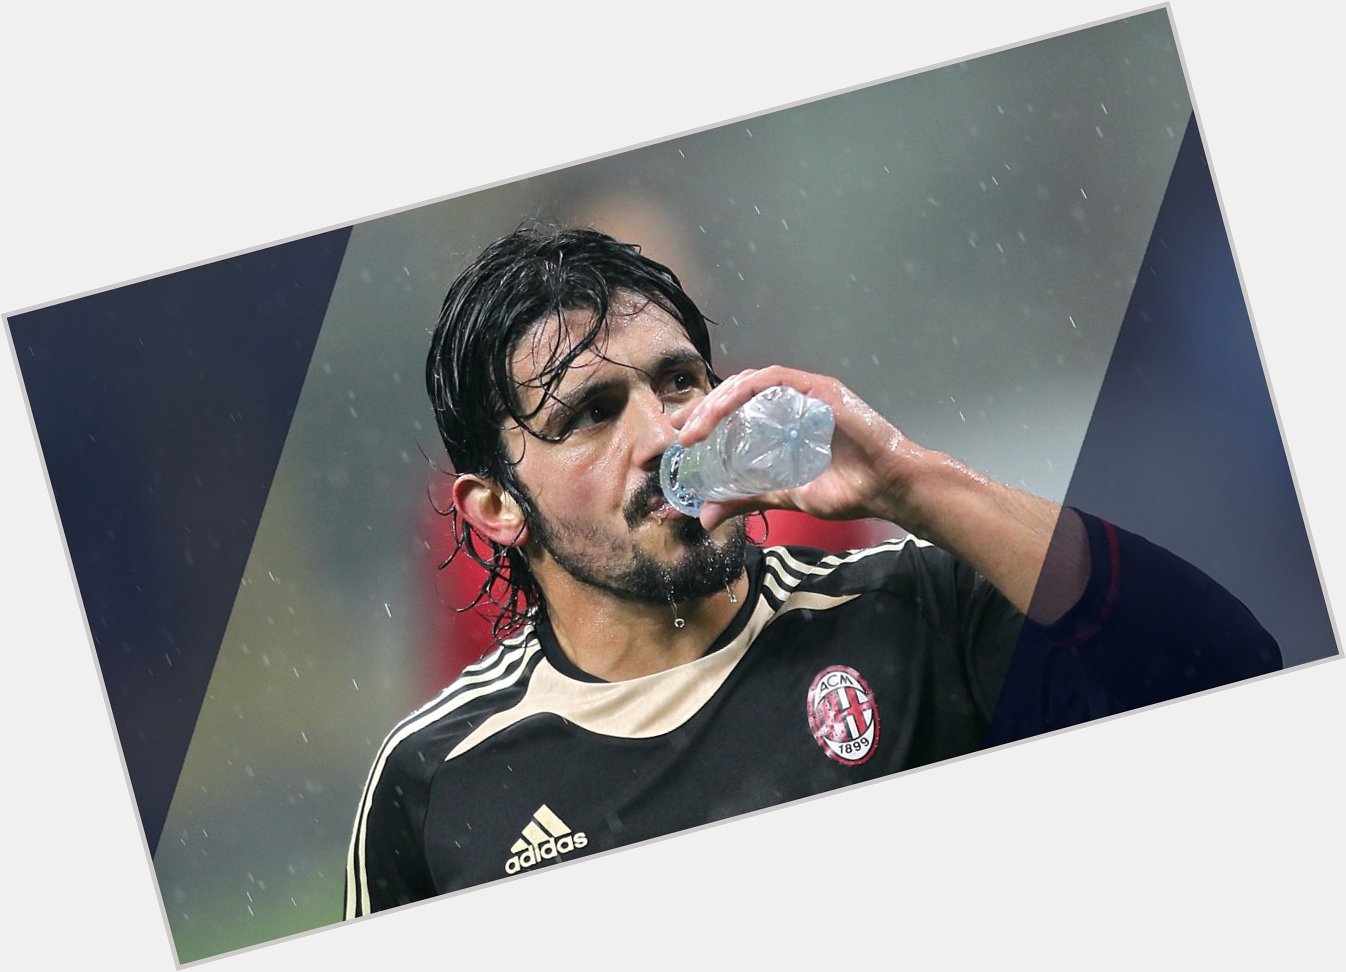 One of the most underrated and fiercest midfielders of all time!

Happy 44th birthday, Gennaro Gattuso.   